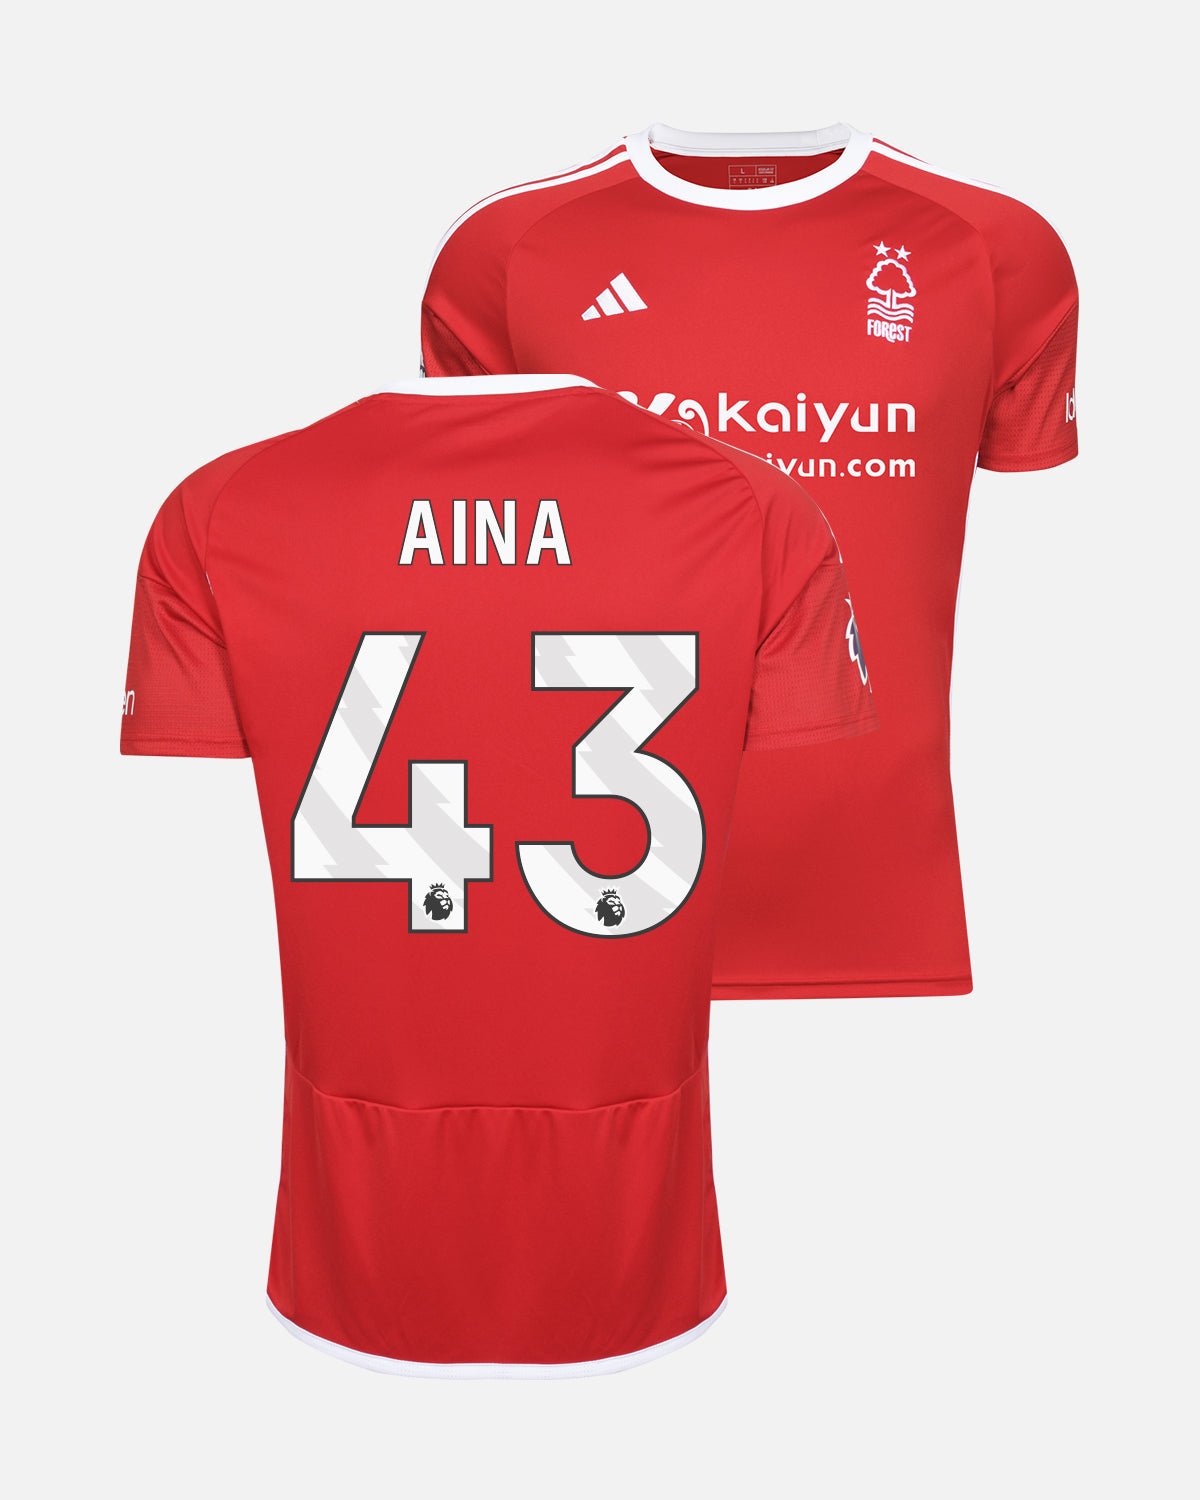 NFFC Home Shirt 23-24 - Aina 43 - Nottingham Forest FC